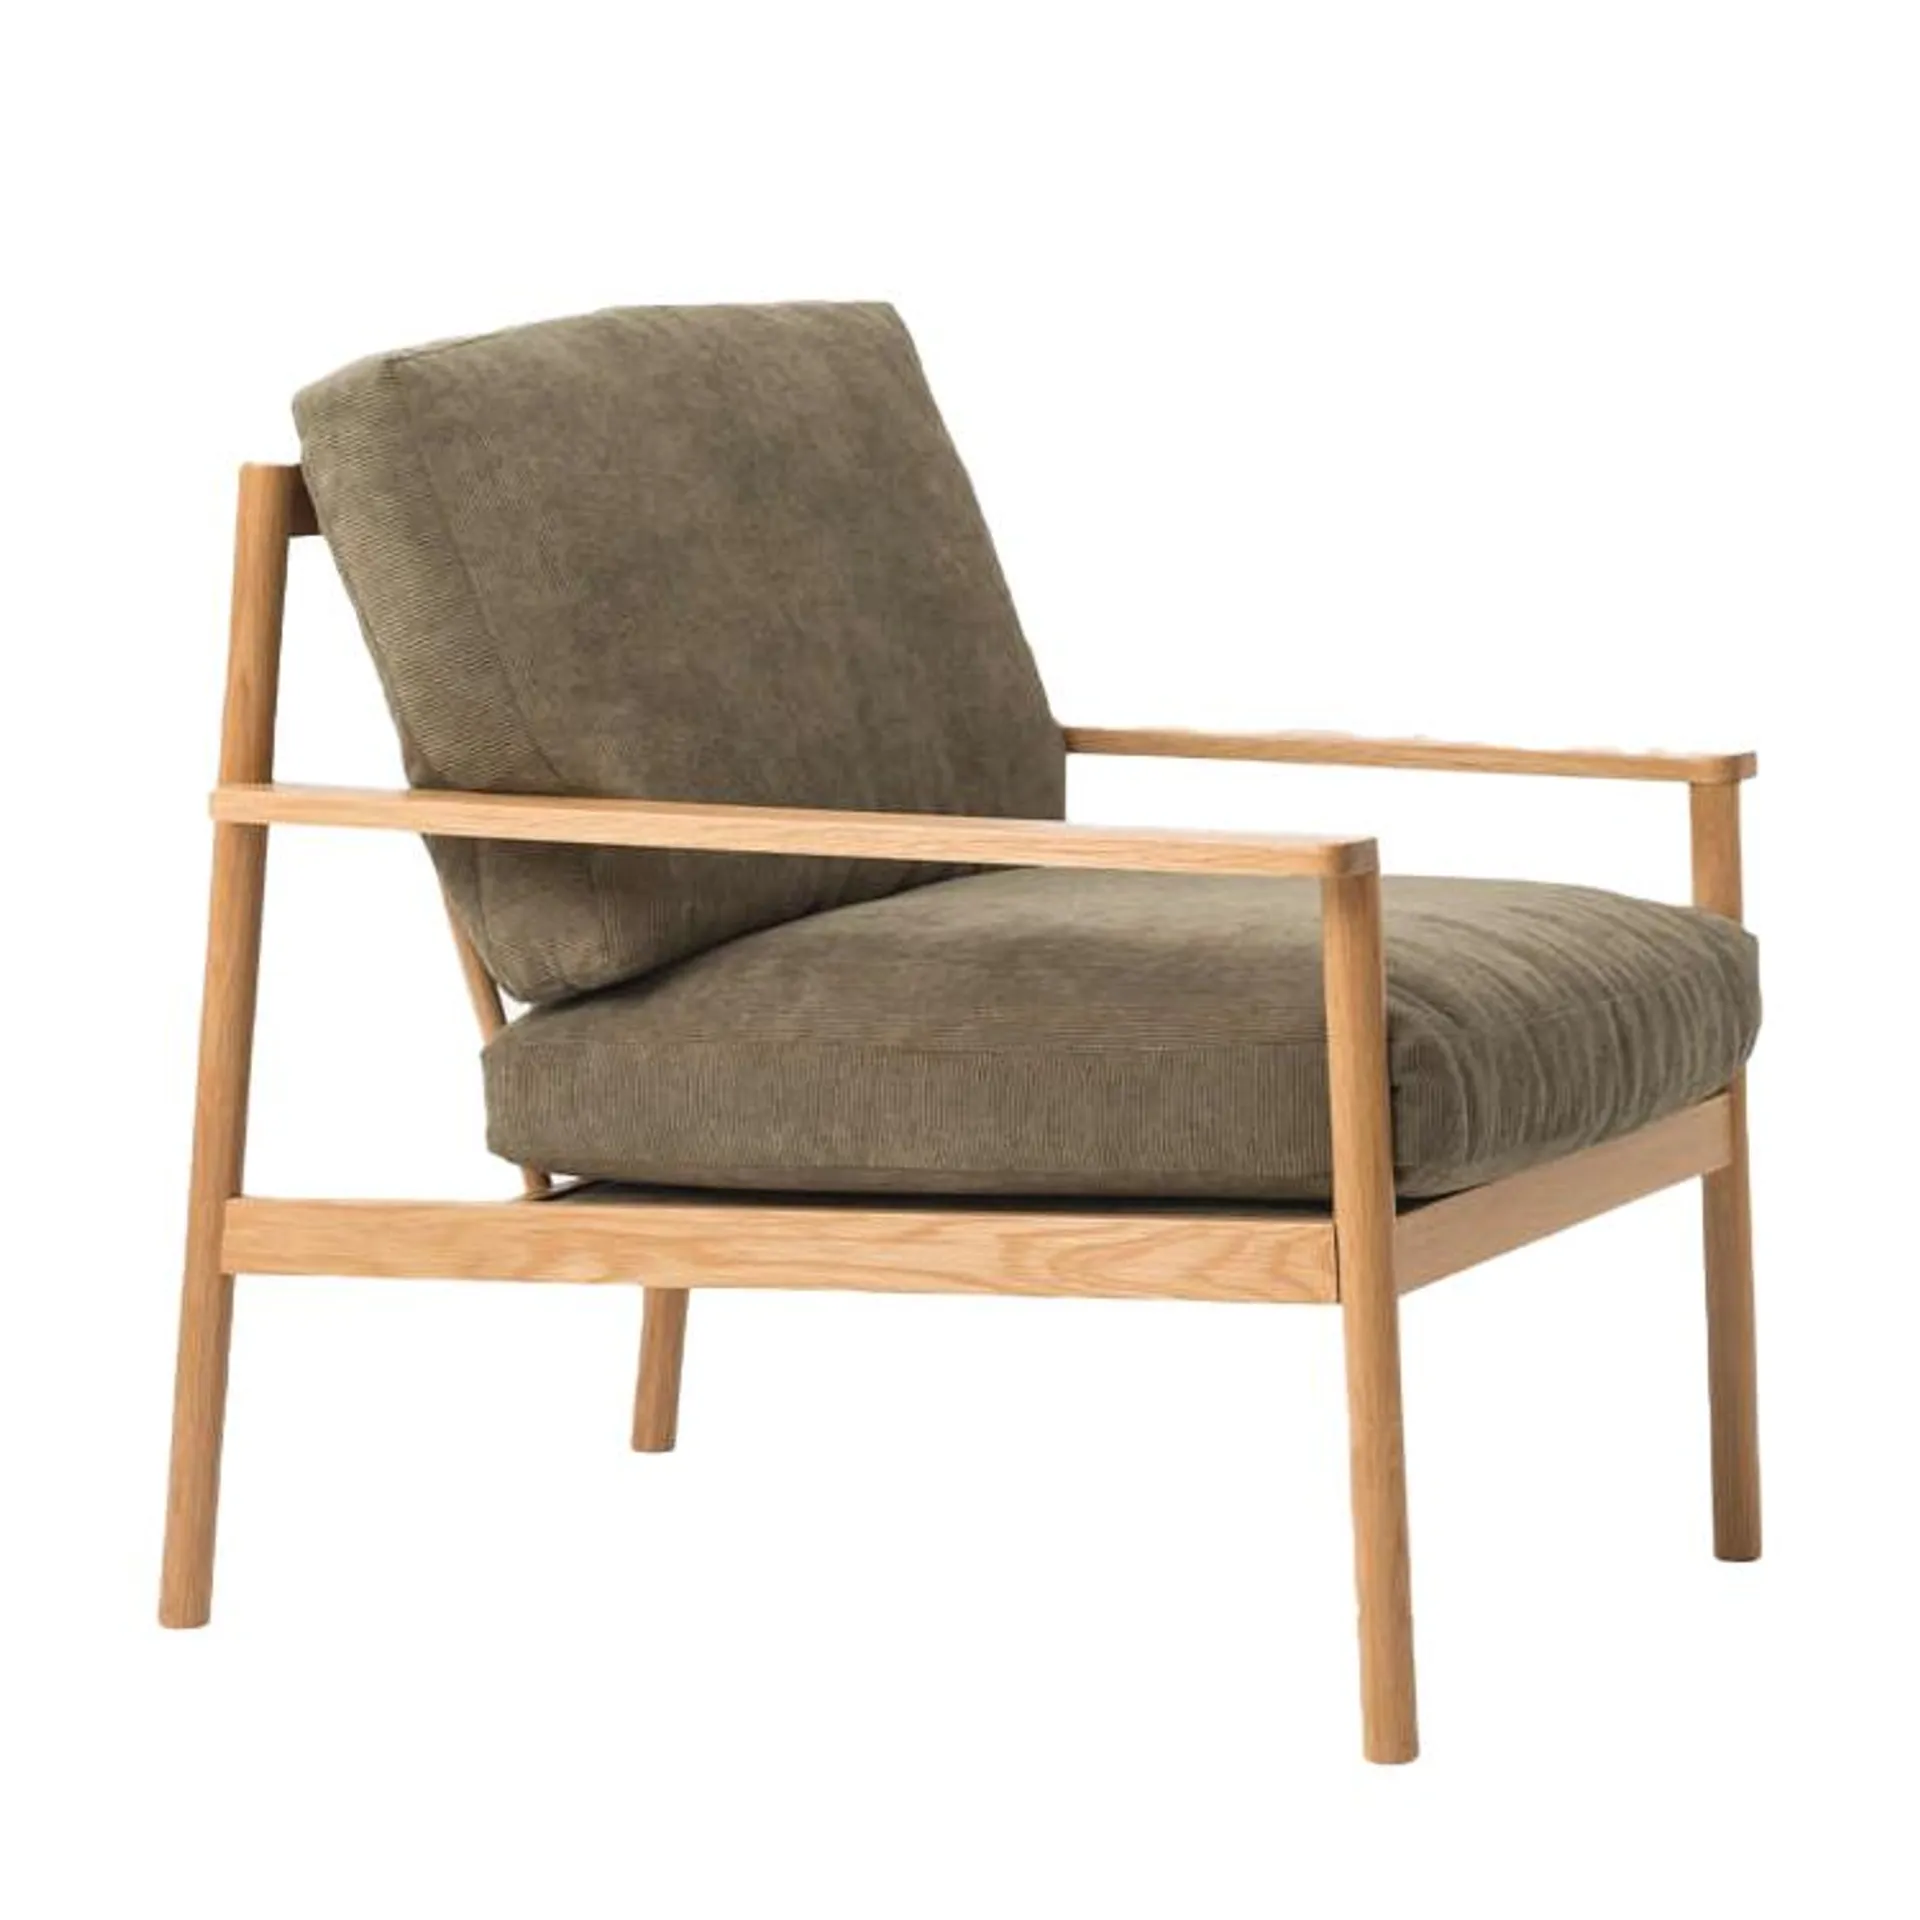 NZ made upholstered armchair cruze cord